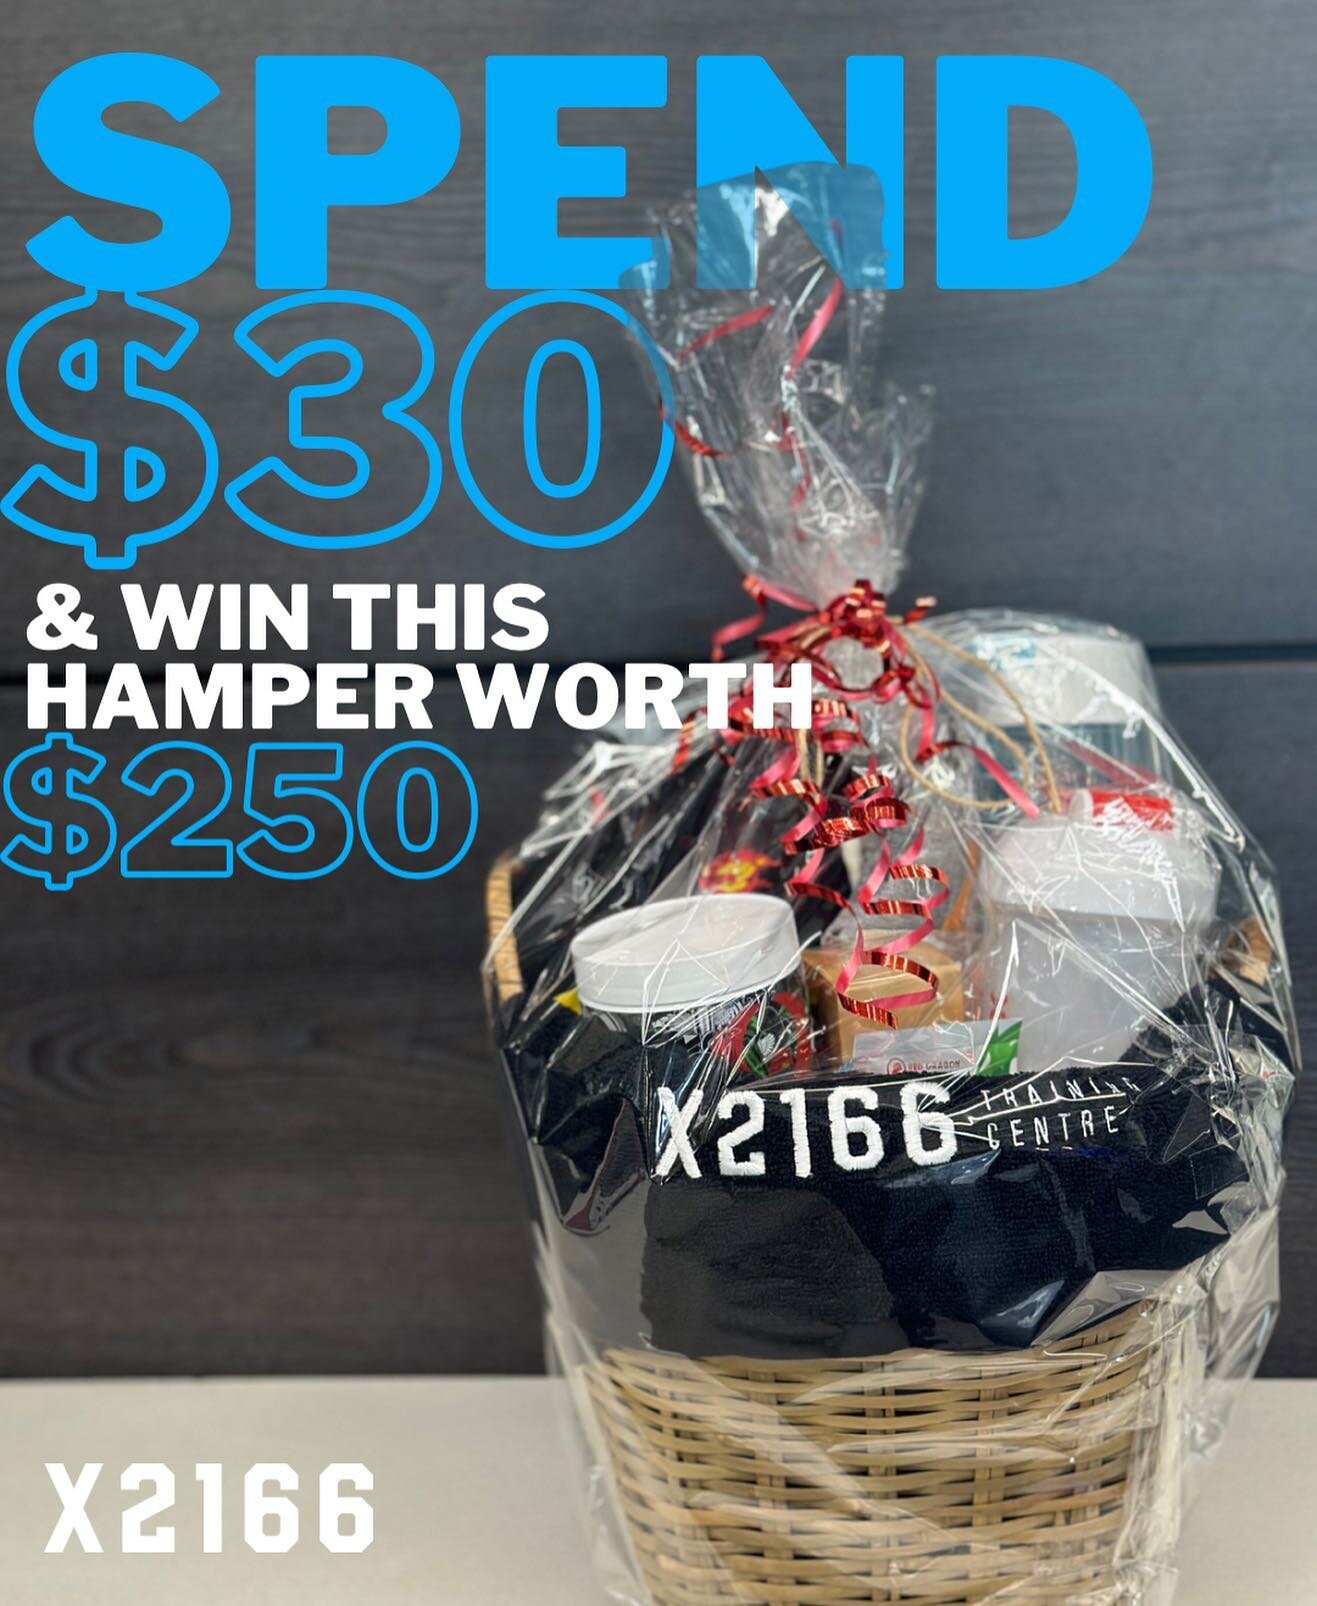 Spend $30 in one transaction and your receipt will go into our draw to win this fitness hamper worth $250 🙌🏽.

Containing X2166 Merchandise, @phoenixnutritionau merchandise and pre workout, Calvin Klein perfume, shaker bottles at more supplement sa